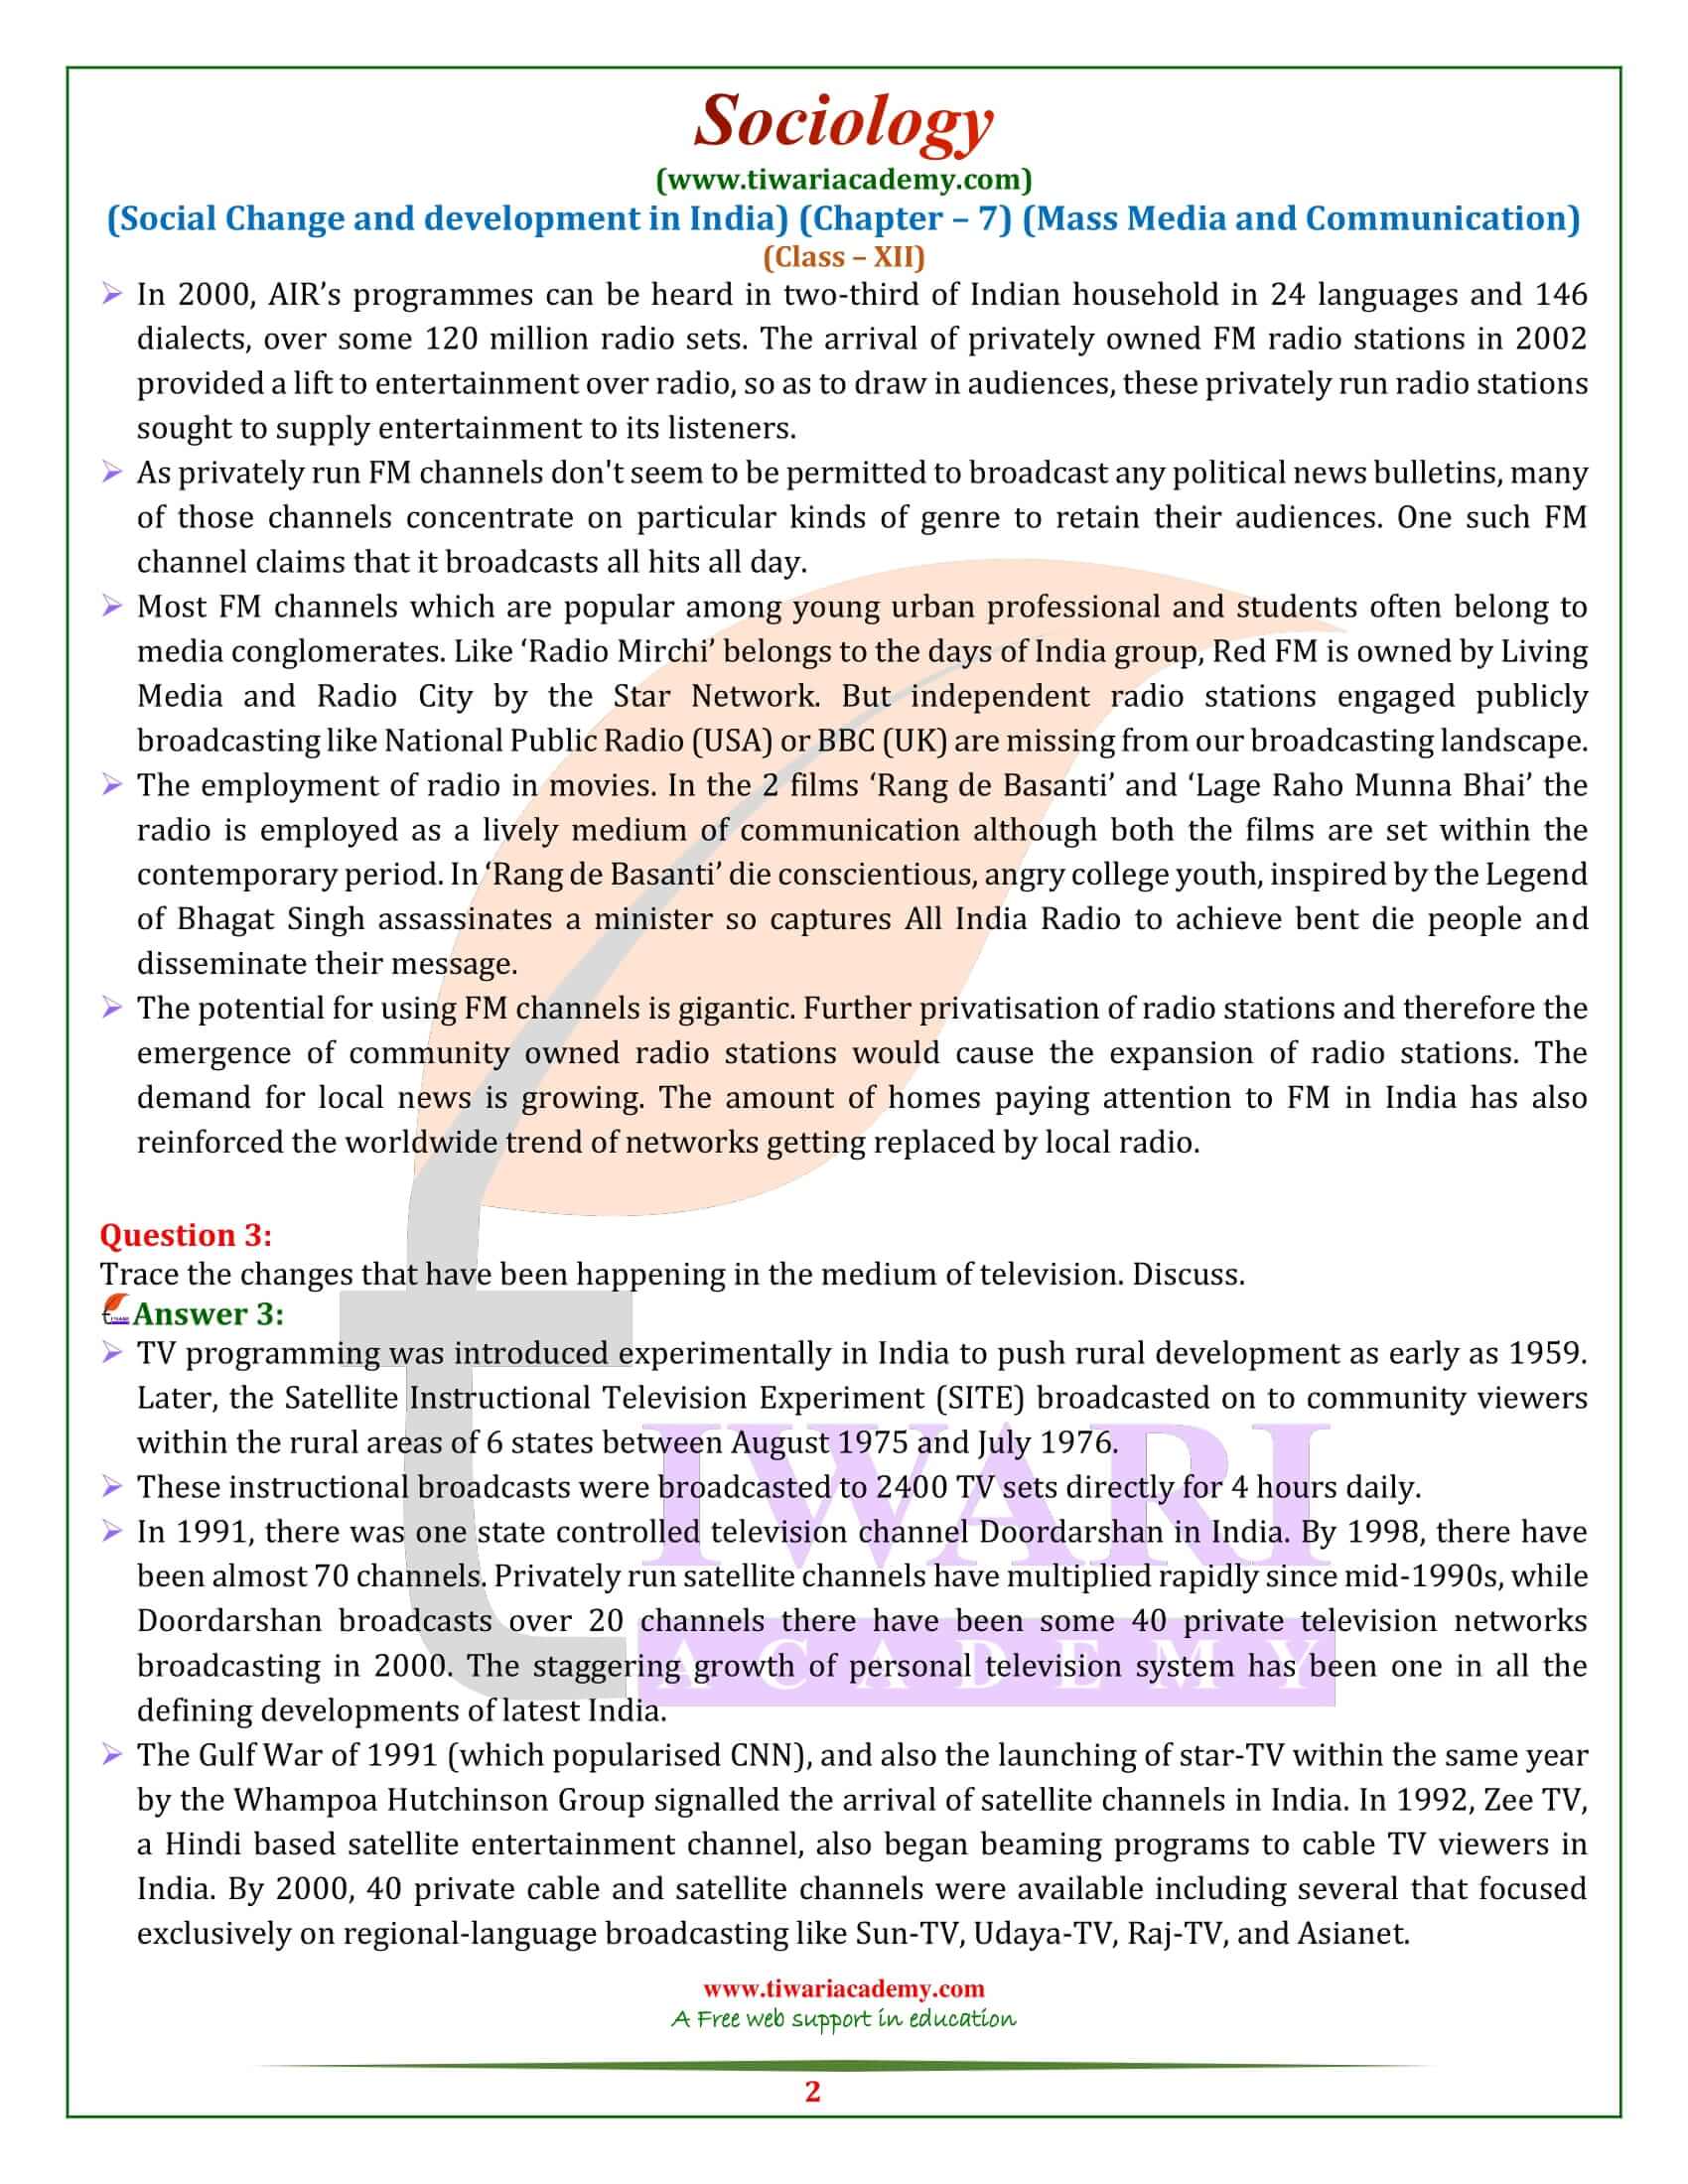 NCERT Solutions for Class 12 Sociology Chapter 7